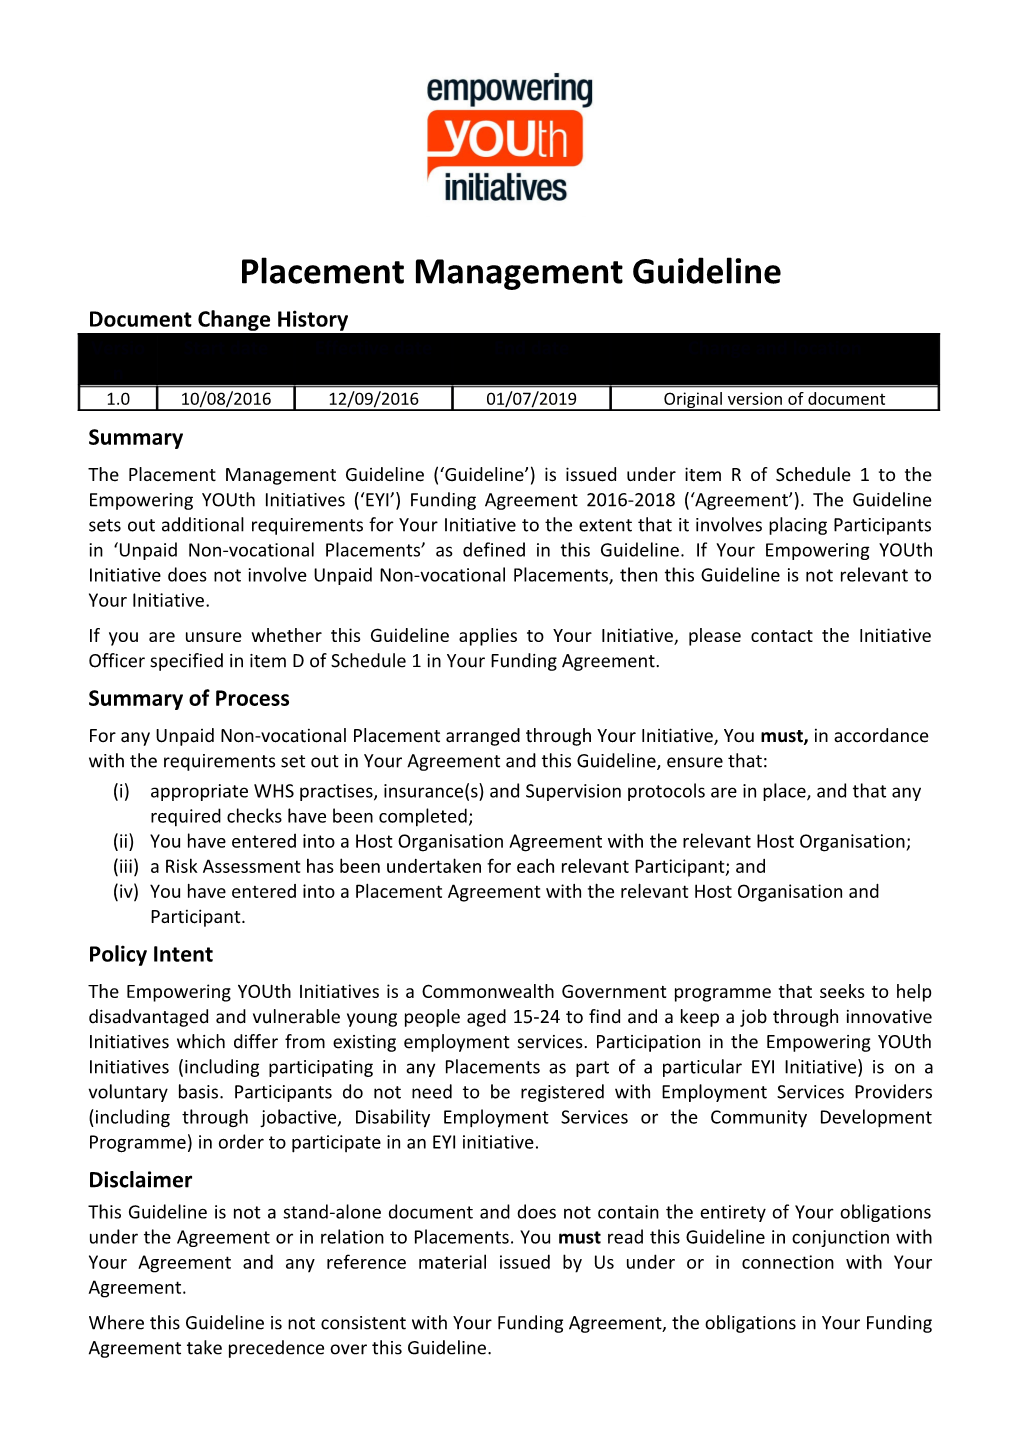 Empowering Youth Initiatives Placement Management Guideline